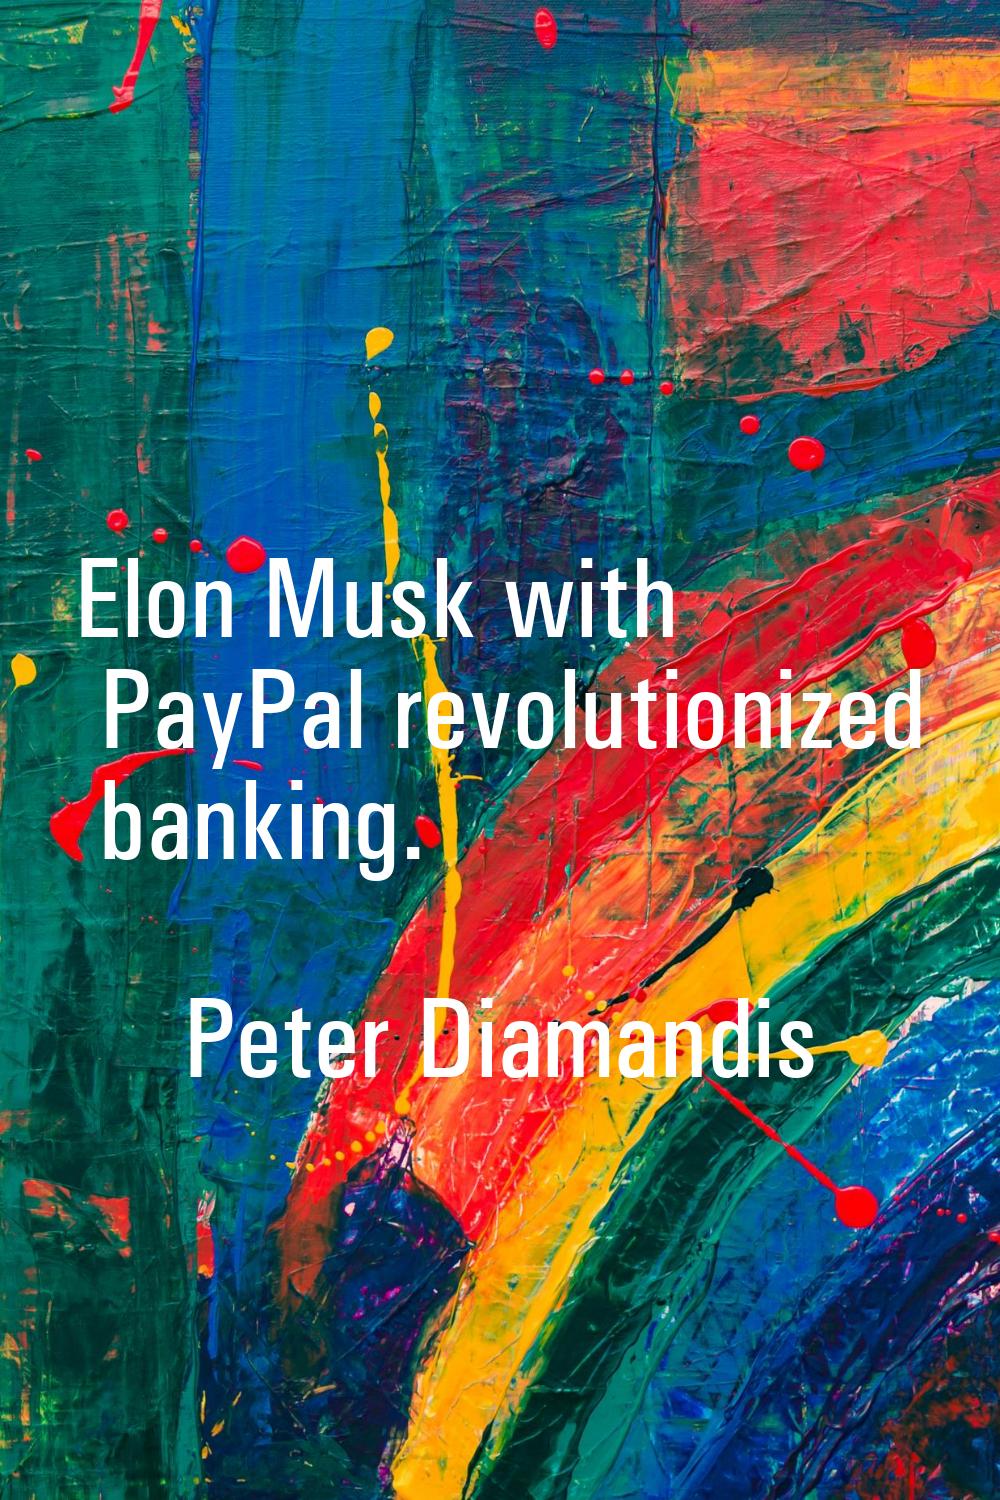 Elon Musk with PayPal revolutionized banking.